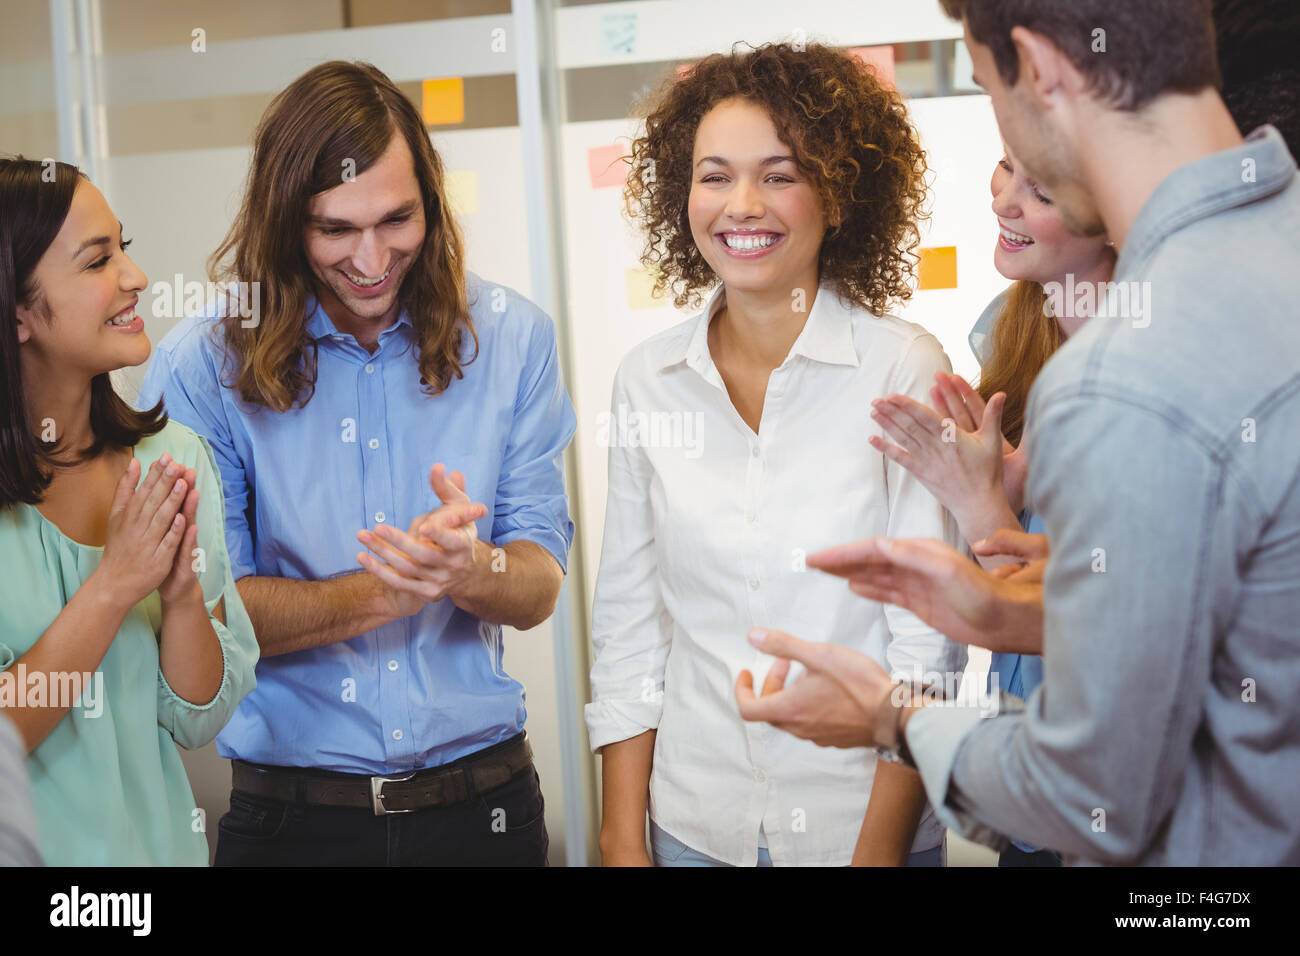 Business people applauding in office Stock Photo